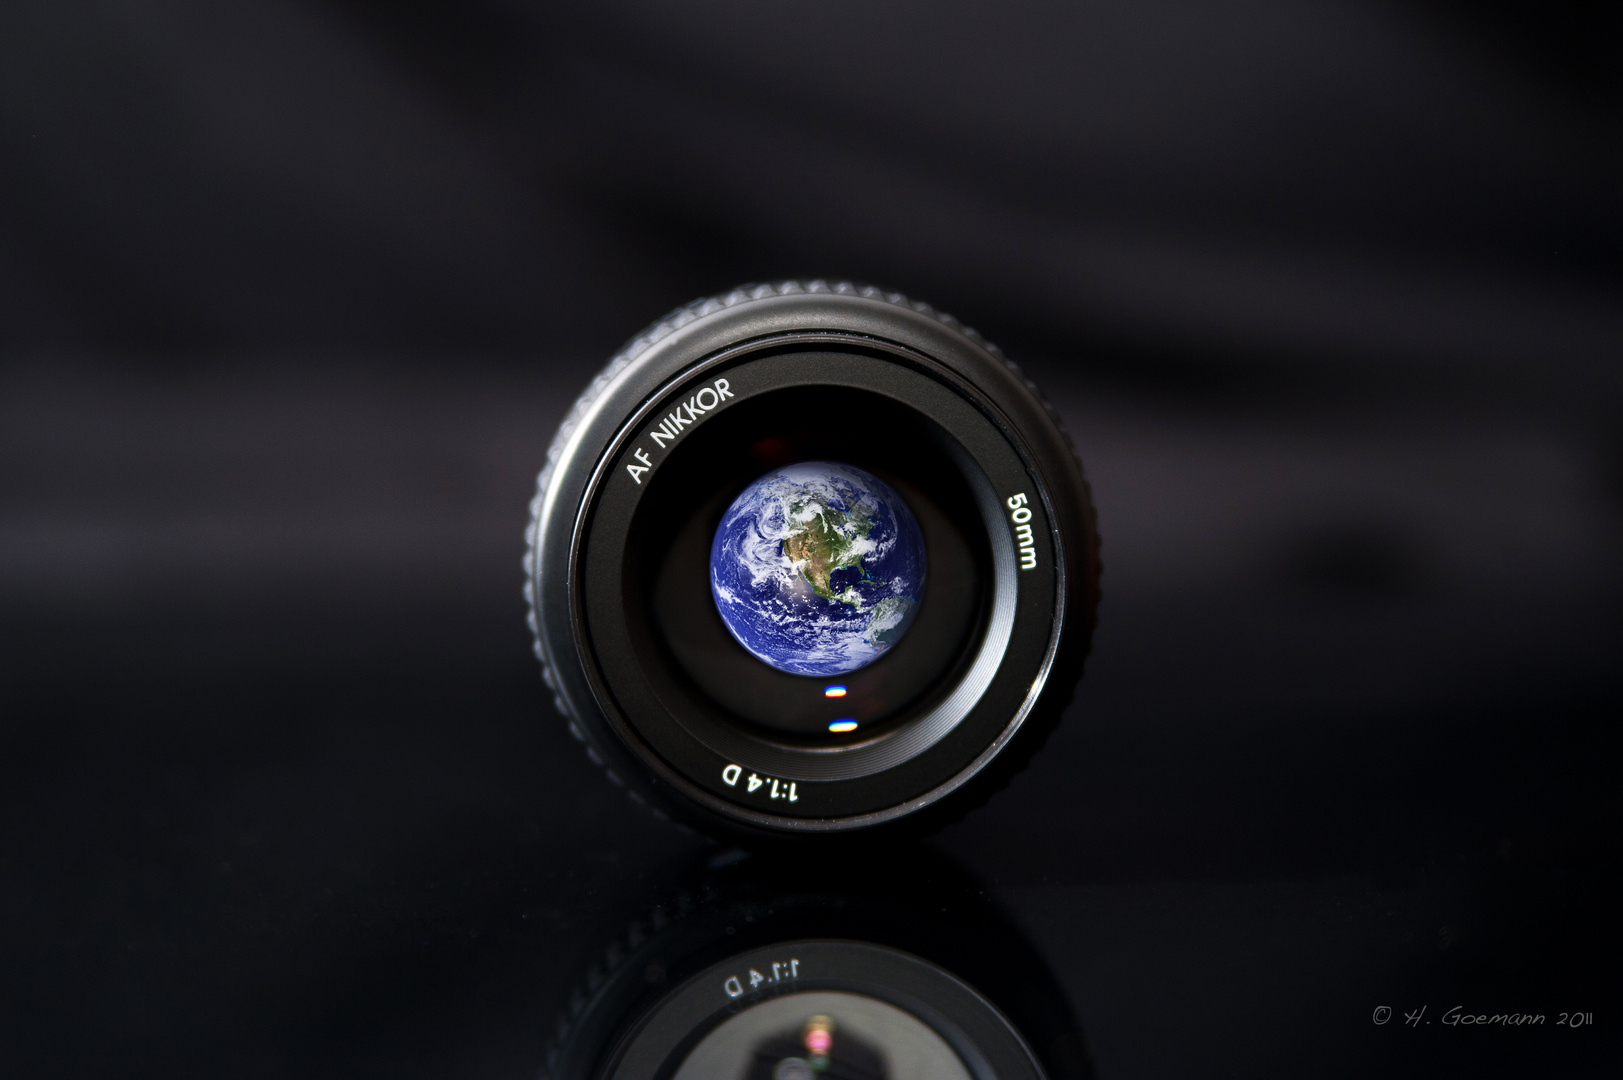 Nikkor 50 1.4D - see the world clearly